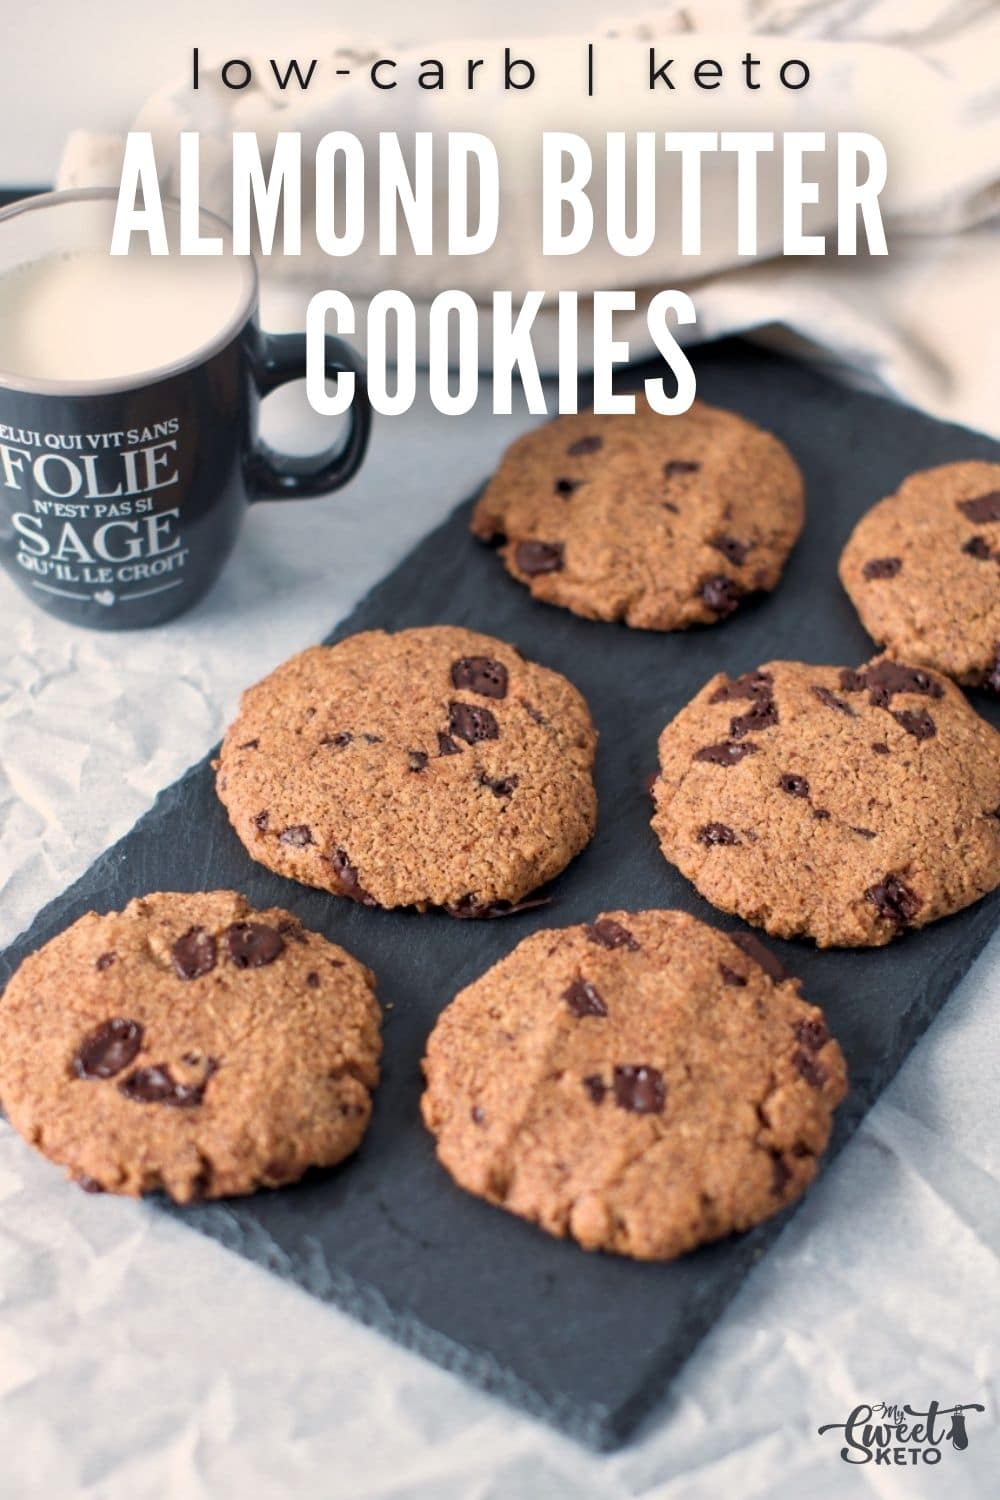 These keto almond butter cookies are amazingly quick and easy to make. In just a few minutes you'll be able to enjoy the rich almond flavors.